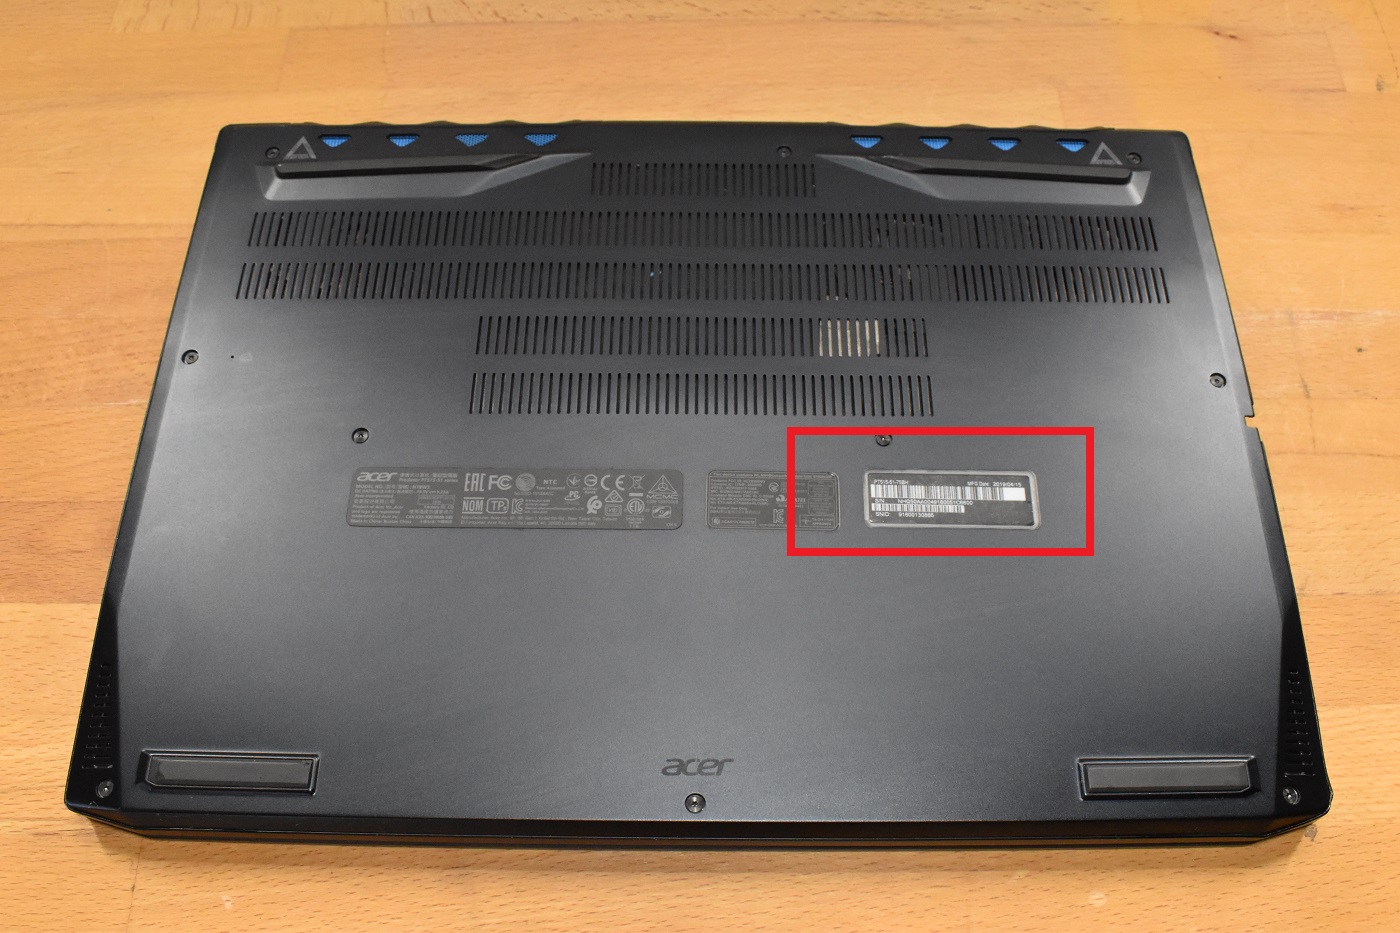 How to Find Your Acer Laptop Model Number